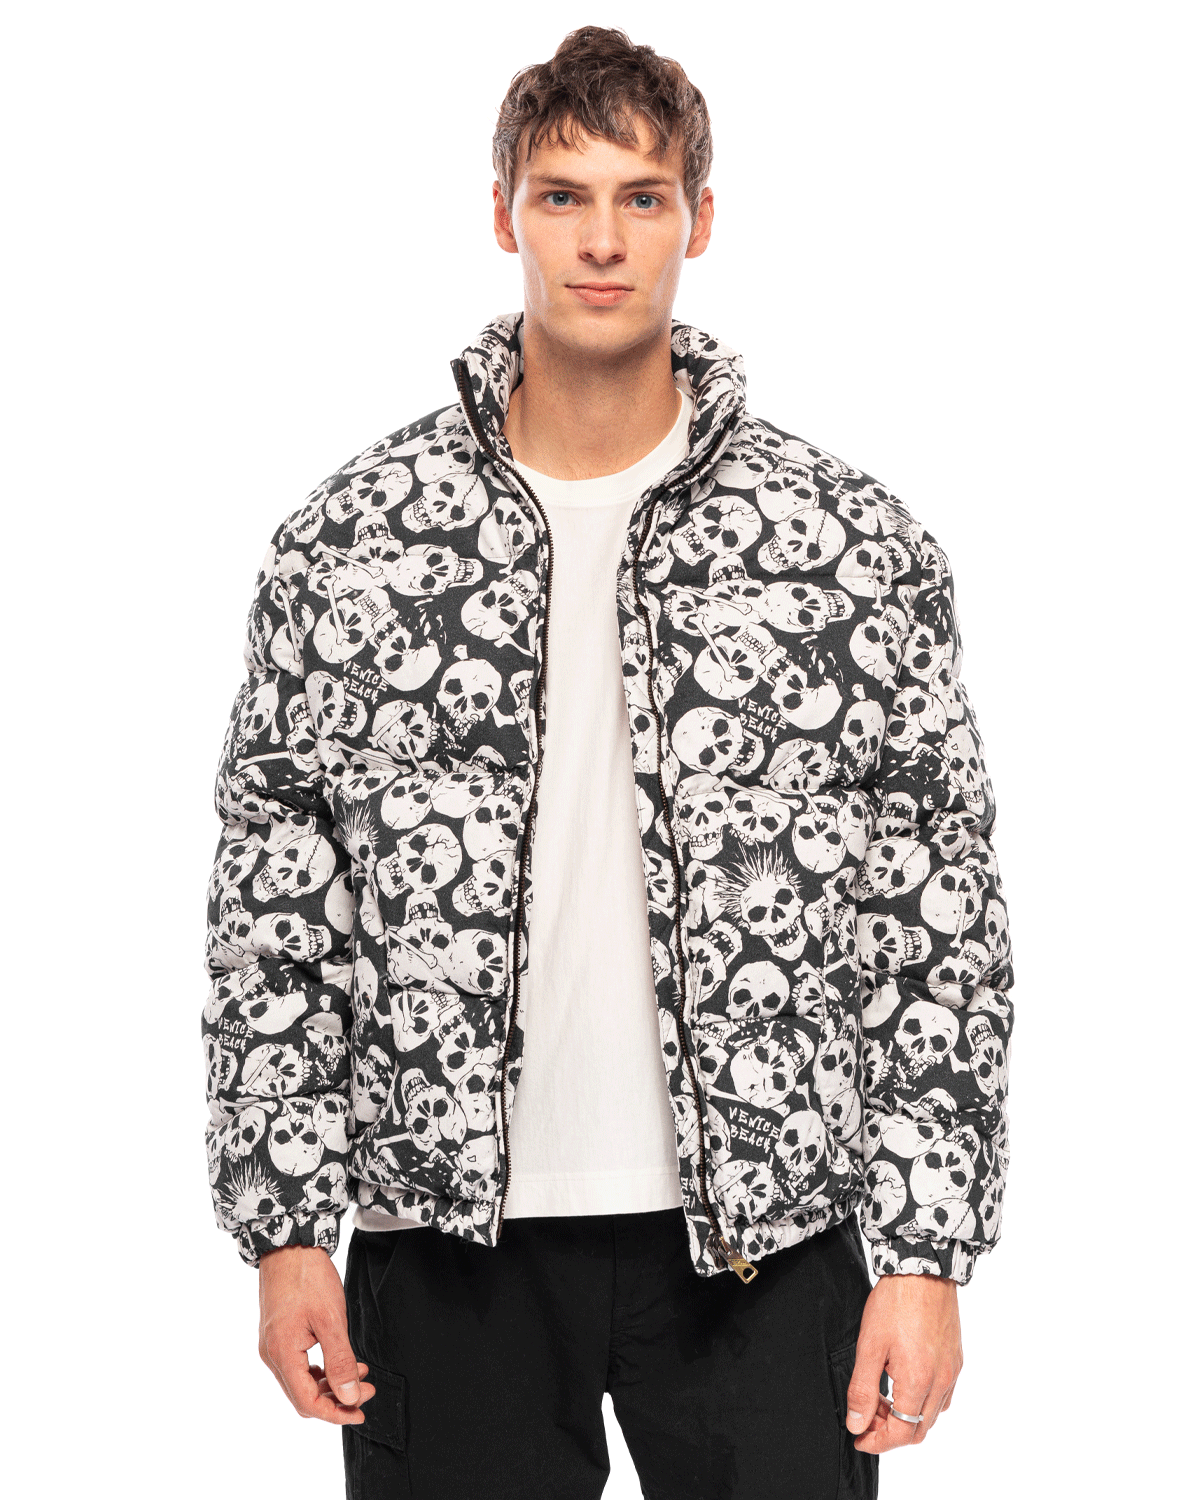 Graphic Cloud Printed Puffer